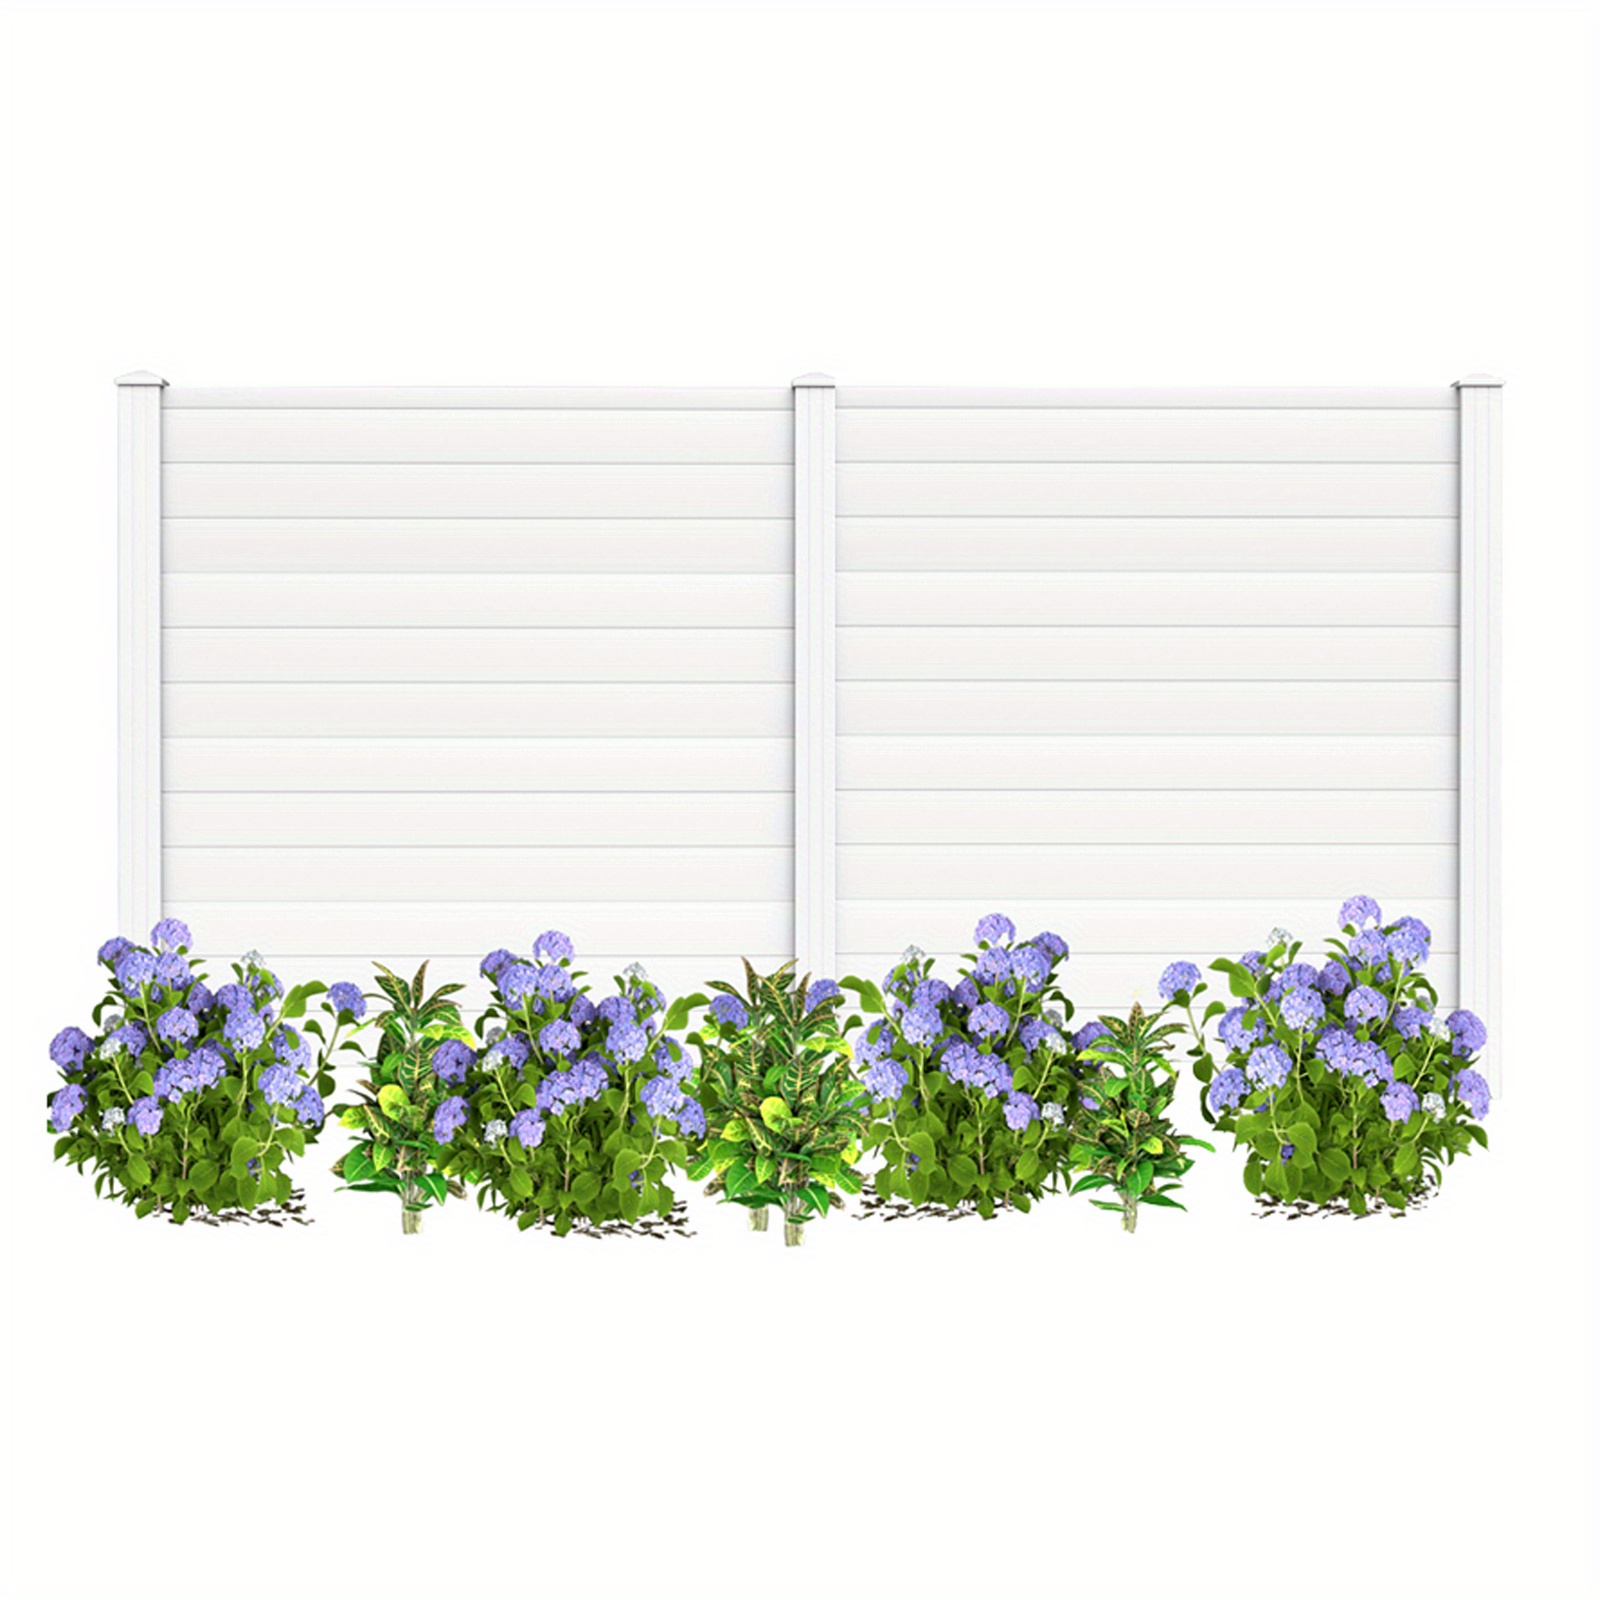 

Outdoor Privacy Fence Panel 2 Picket Pvc Decorative Fence W/ 3 Cuspidal Stakes